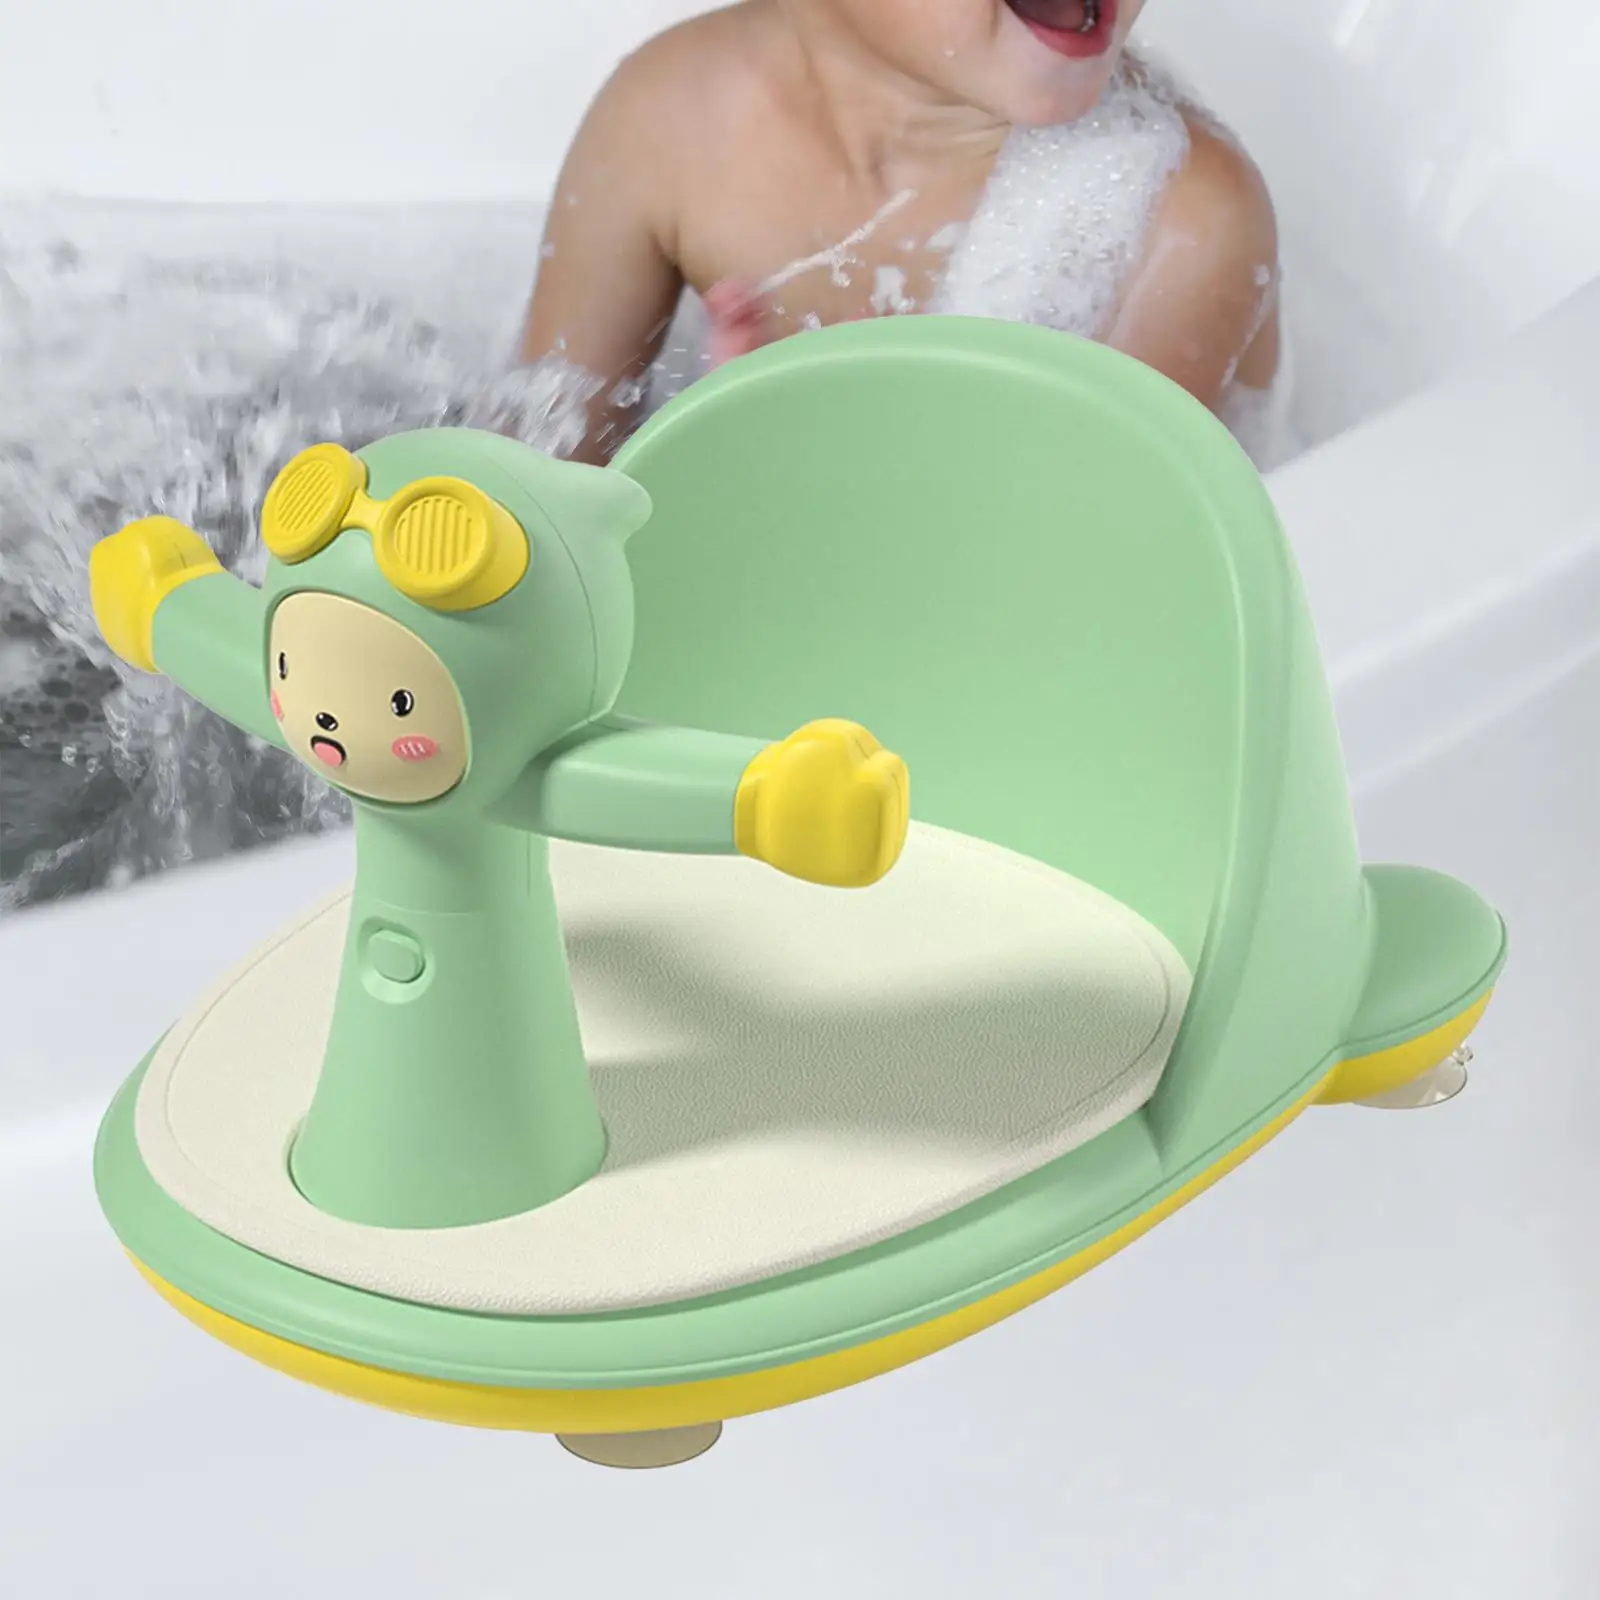 Baby Bath Tub Seat stable Backrest color Leather Mat for Bathroom